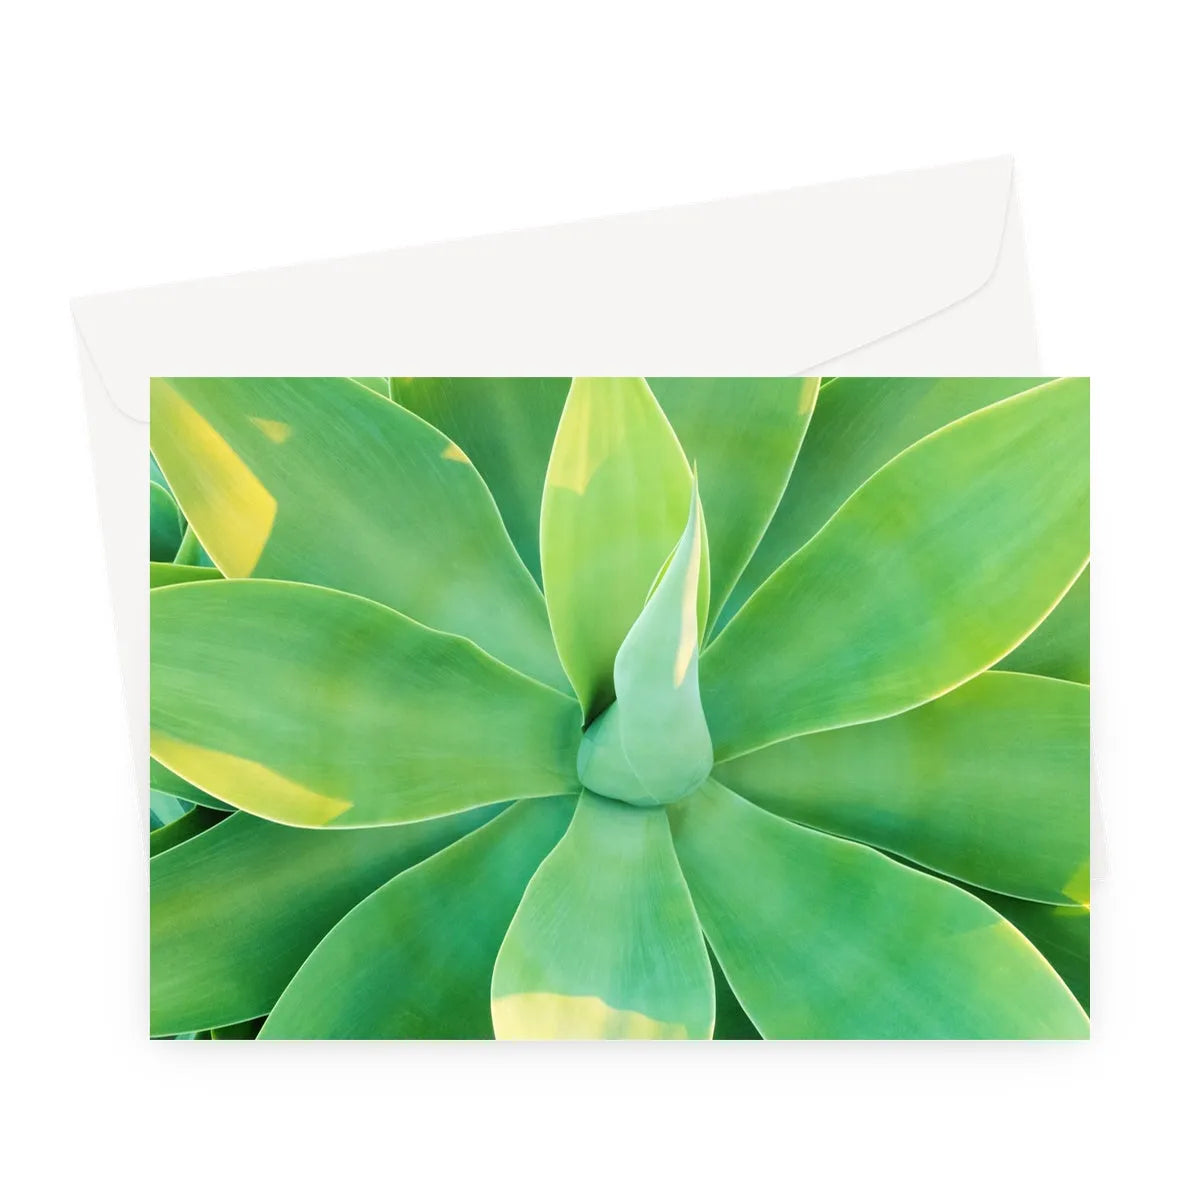 In Bloom Too Greeting Card - A5 Landscape / 1 Card - Greeting & Note Cards - Aesthetic Art